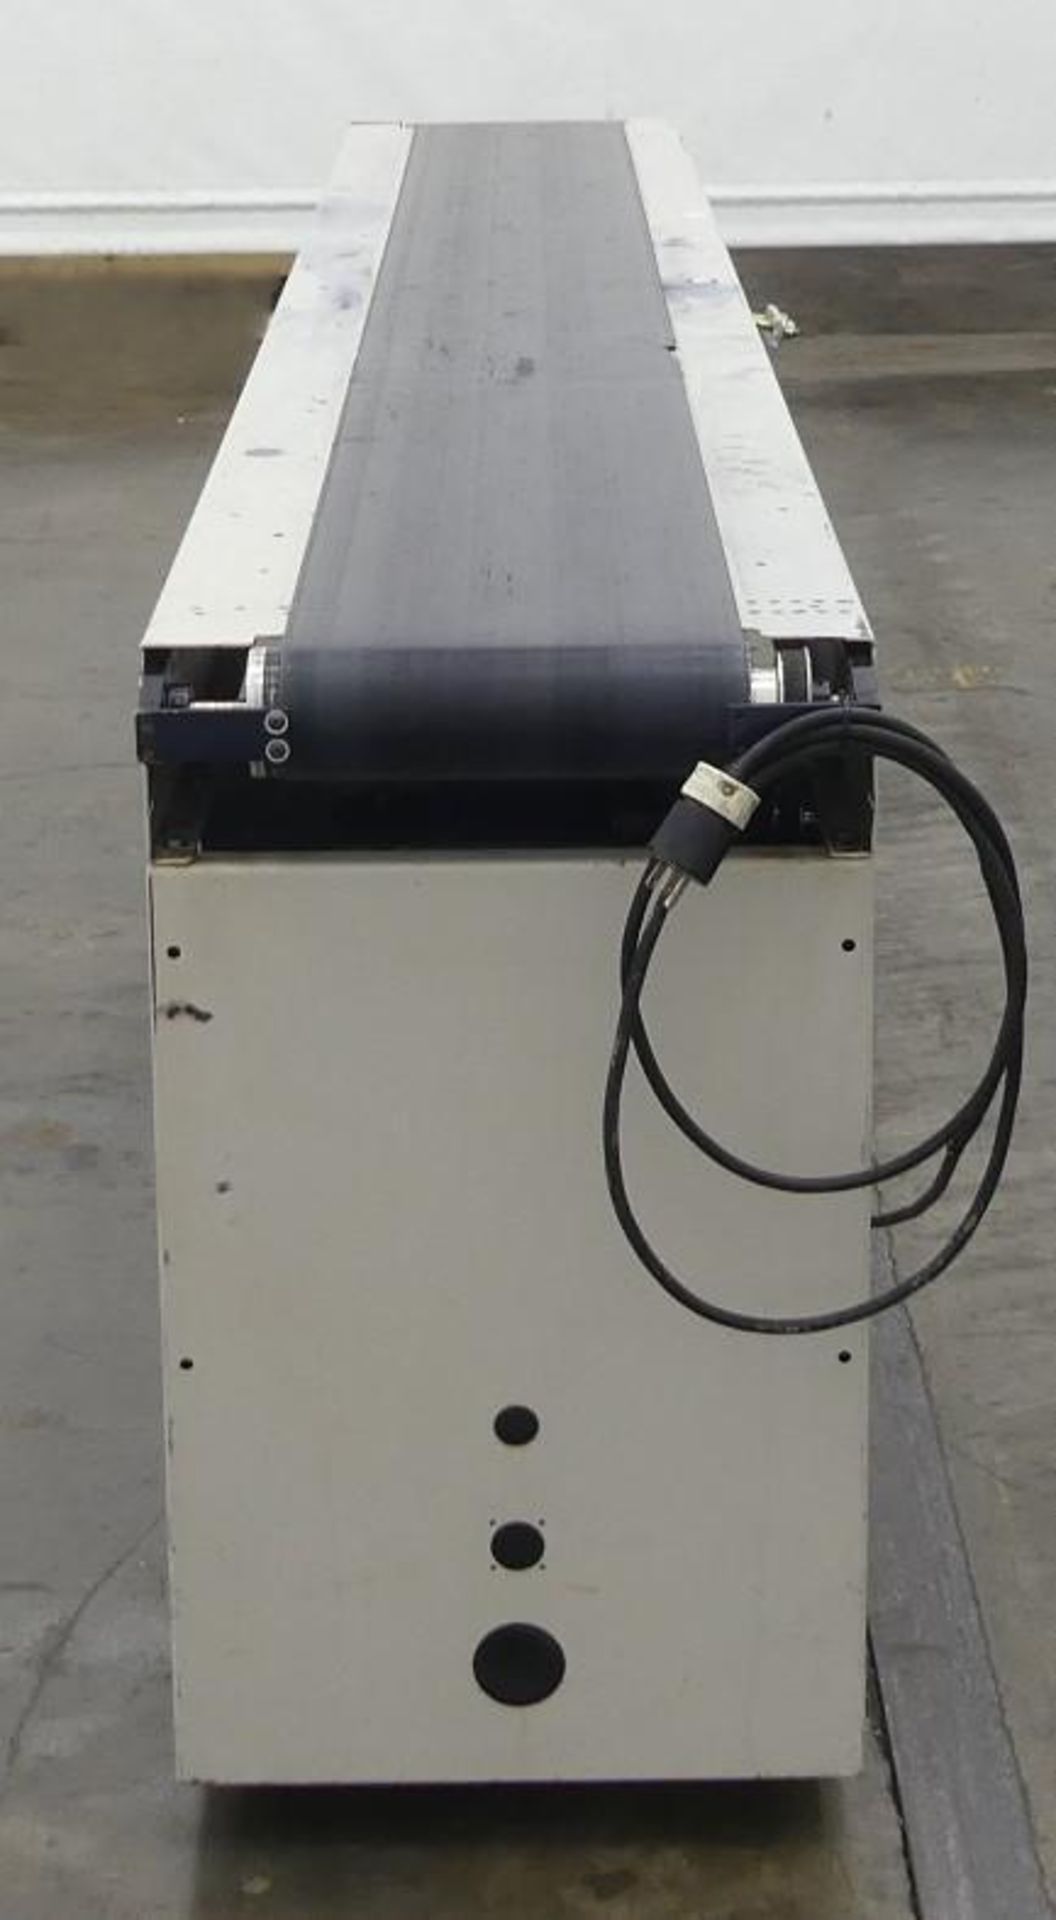 106" by 10" Smooth Top Belt Conveyor - Image 5 of 10